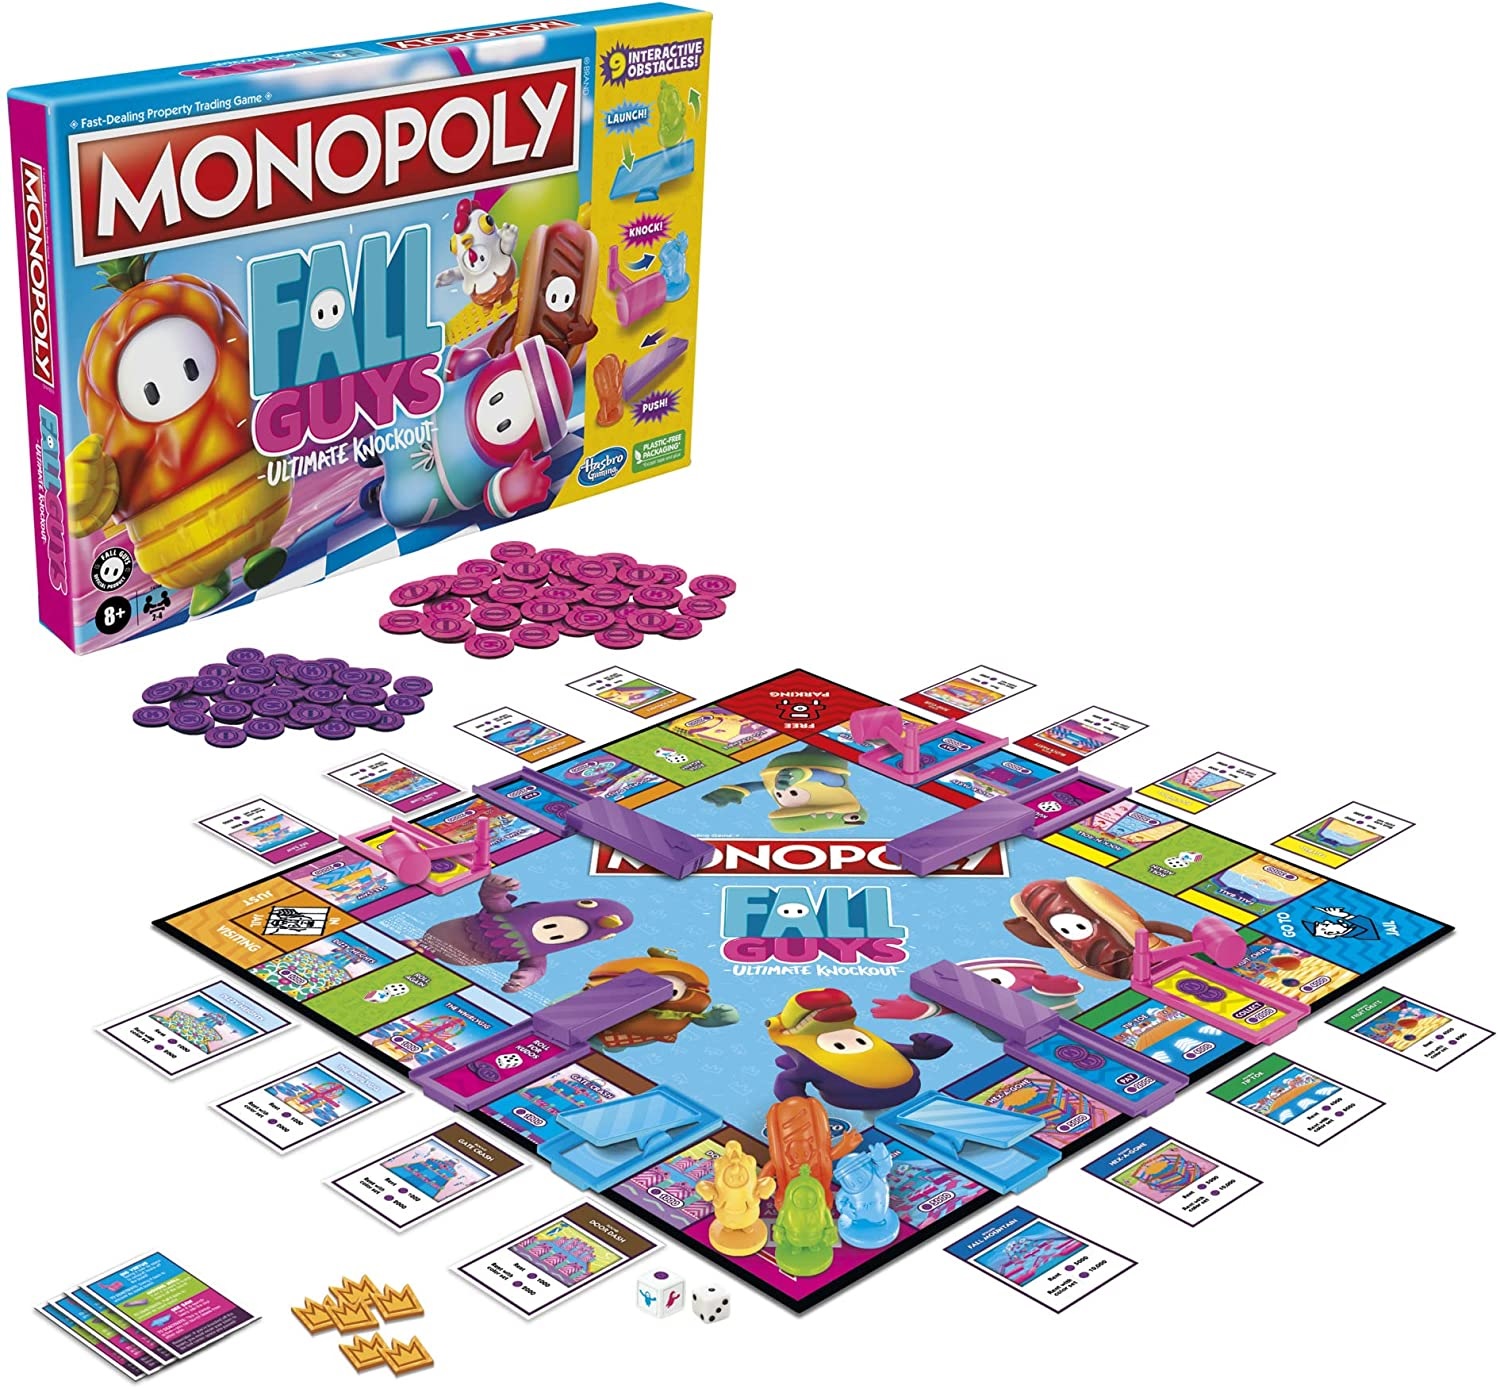 MONOPOLY Fall Guys Ultimate Knockout Edition Board Game $11.99+FS w/Prime